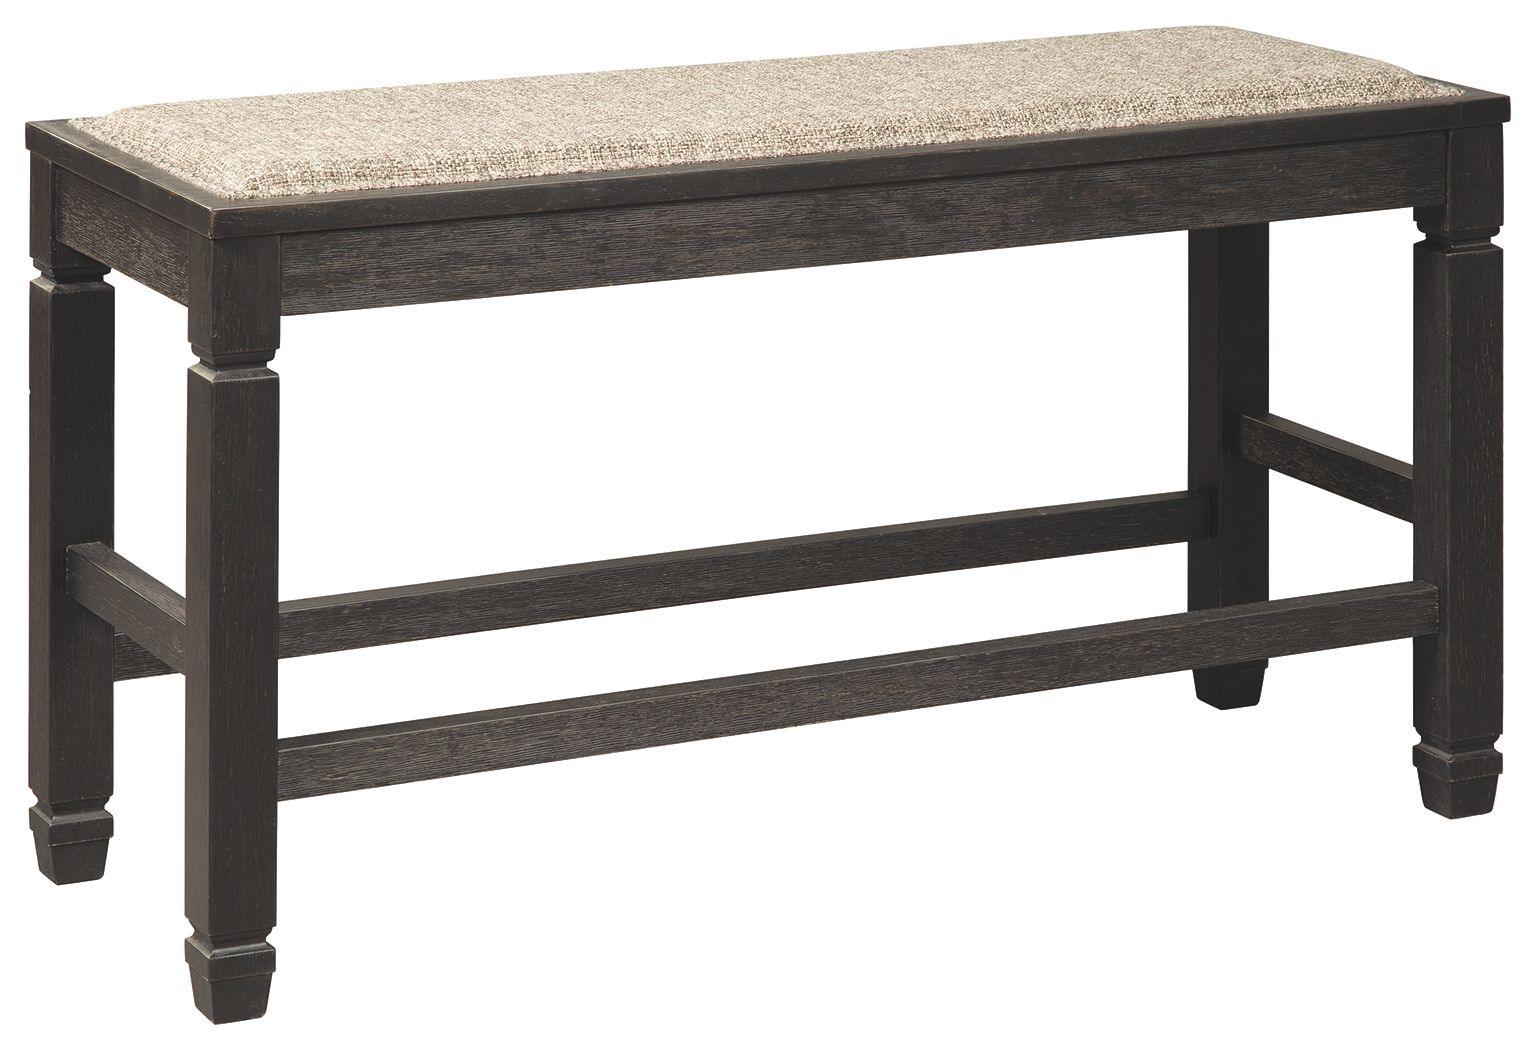 Ashley Furniture - Tyler - Antique Black - Dbl Counter Uph Bench - 5th Avenue Furniture